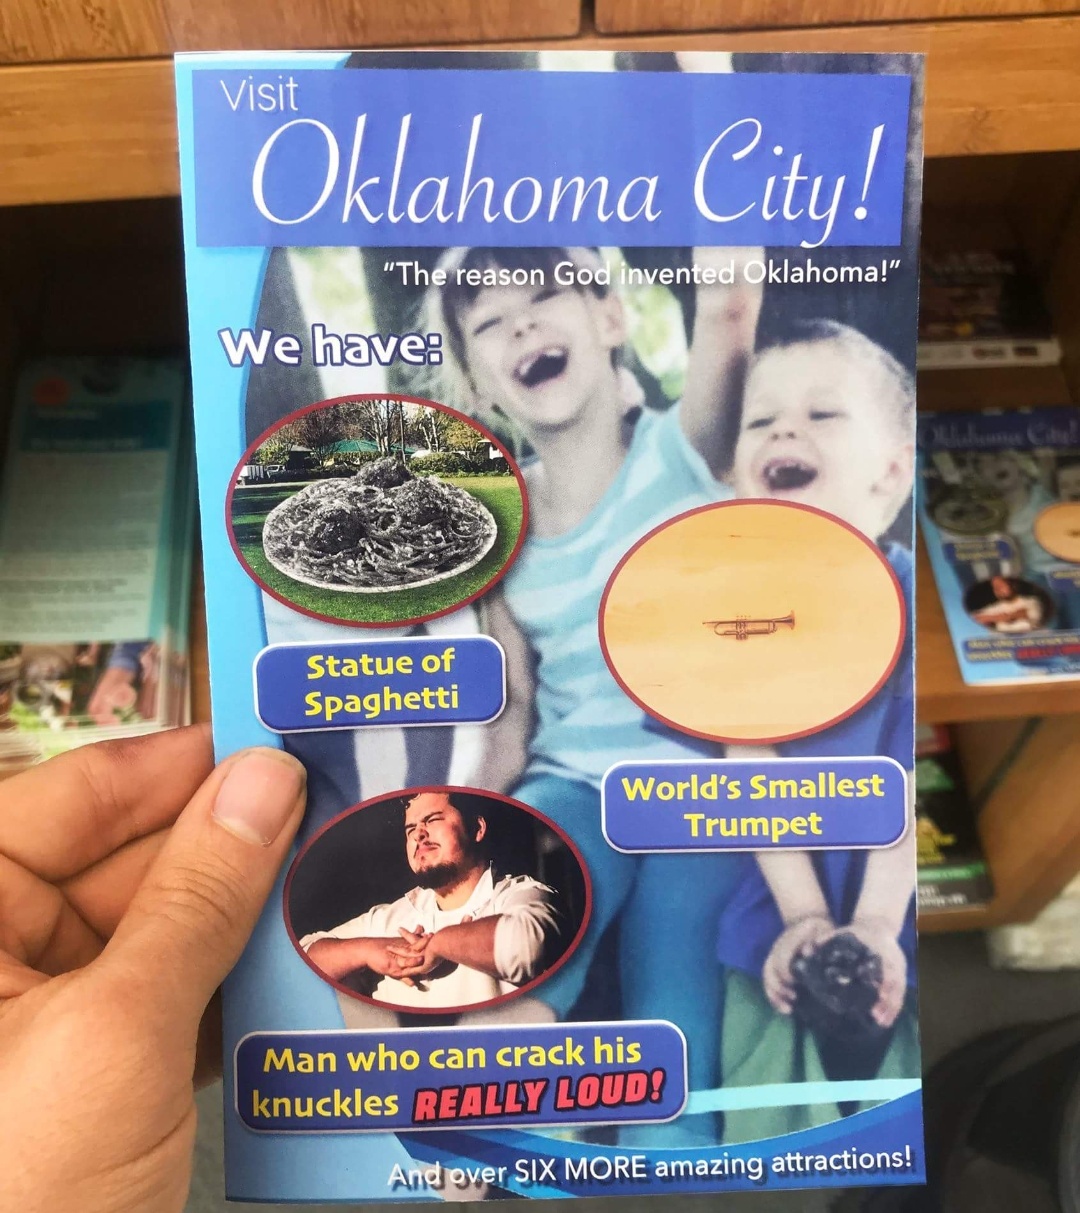 book - Visit Oklahoma City! "The reason God invented Oklahoma!" We have Statue of Spaghetti World's Smallest Trumpet Man who can crack his knuckles Really Loud! And over Six More amazing attractions!